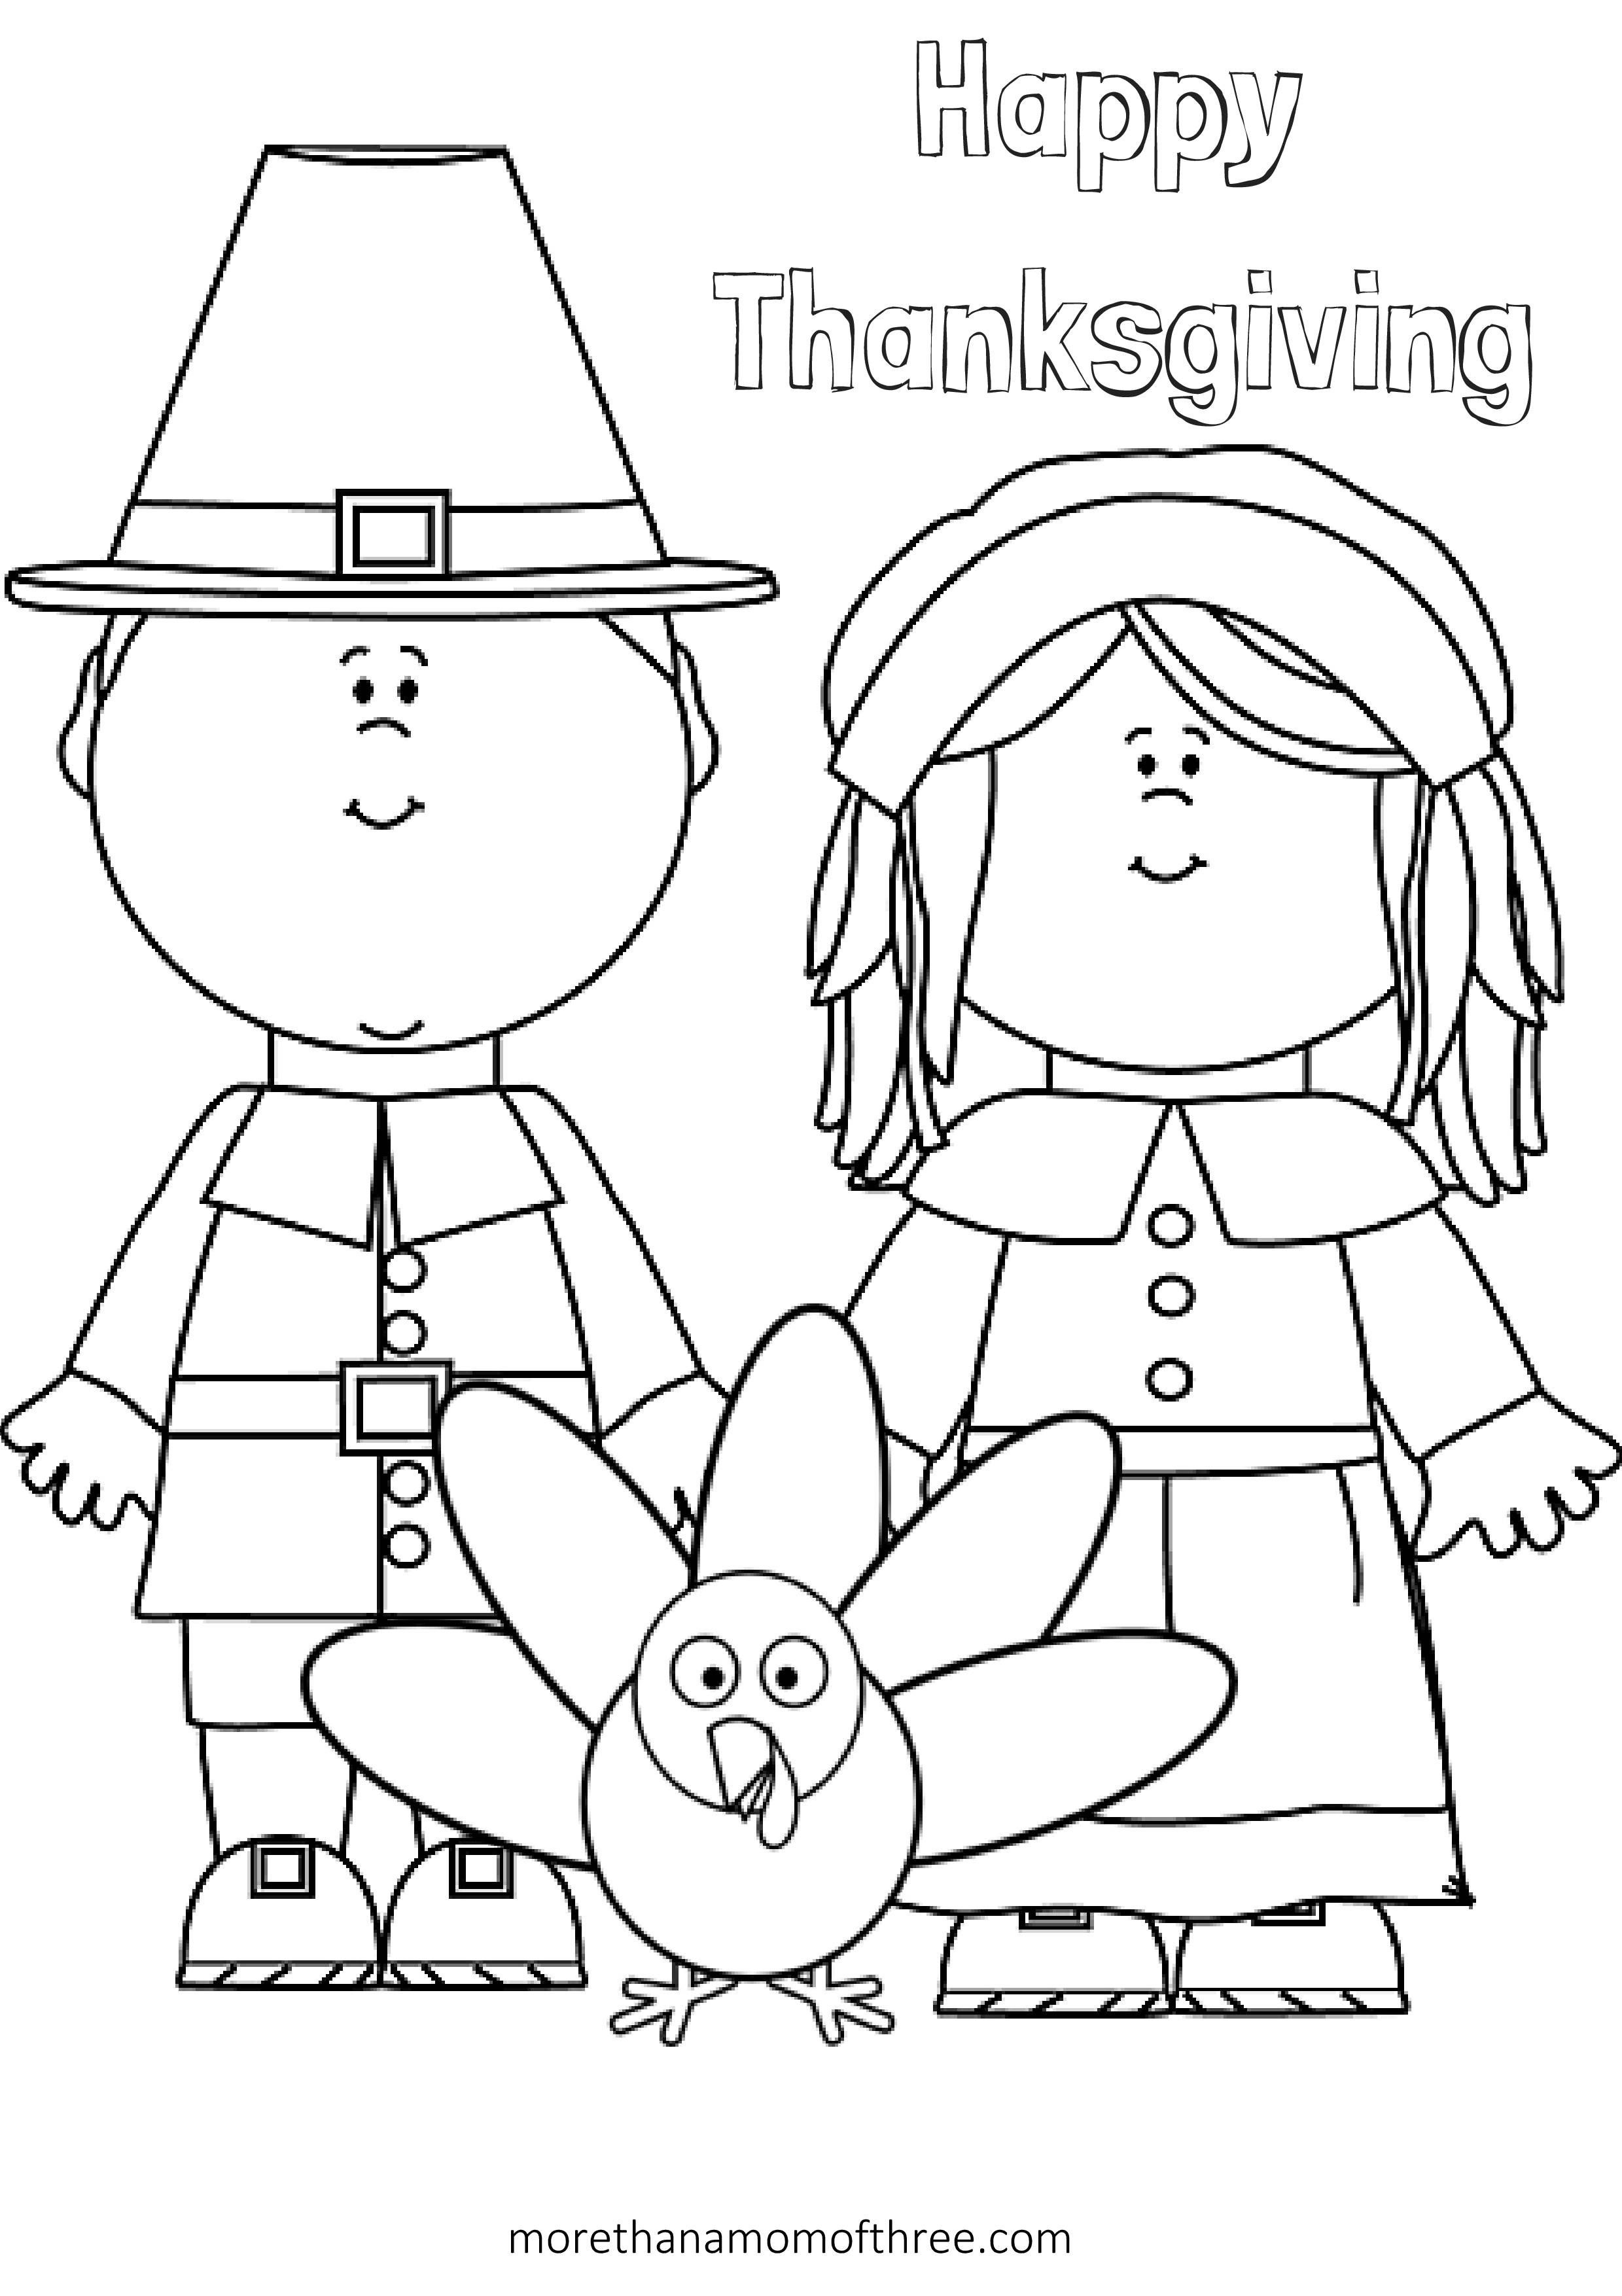 Coloring Pages Thanksgiving Free Printables For | Coloring Pages - Free Printable Coloring Sheets Thanksgiving